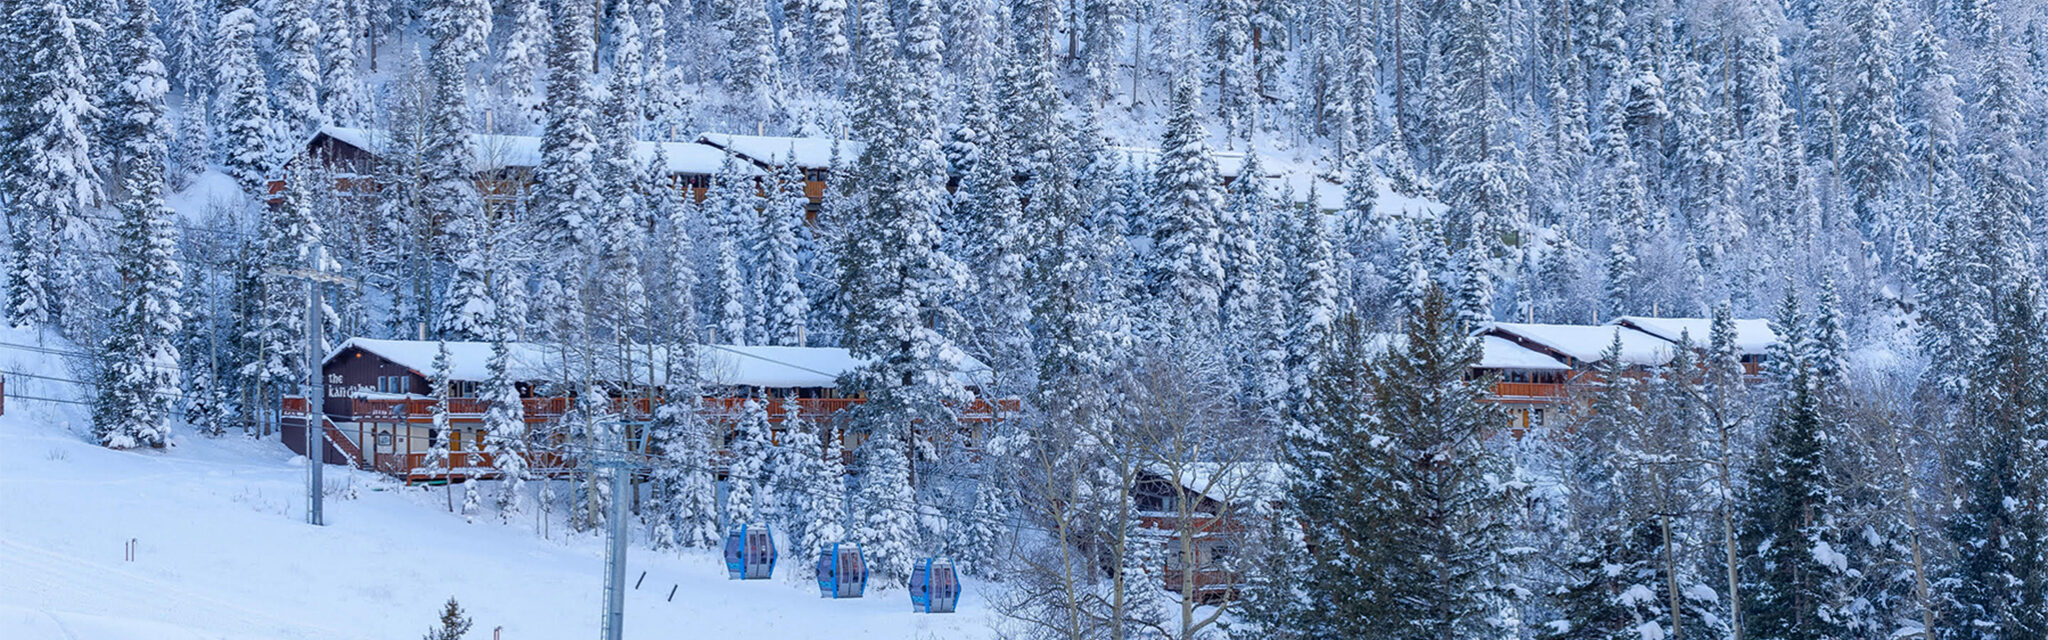 A snow covered wooden framed hotel sits perched above a ski run in the trees.